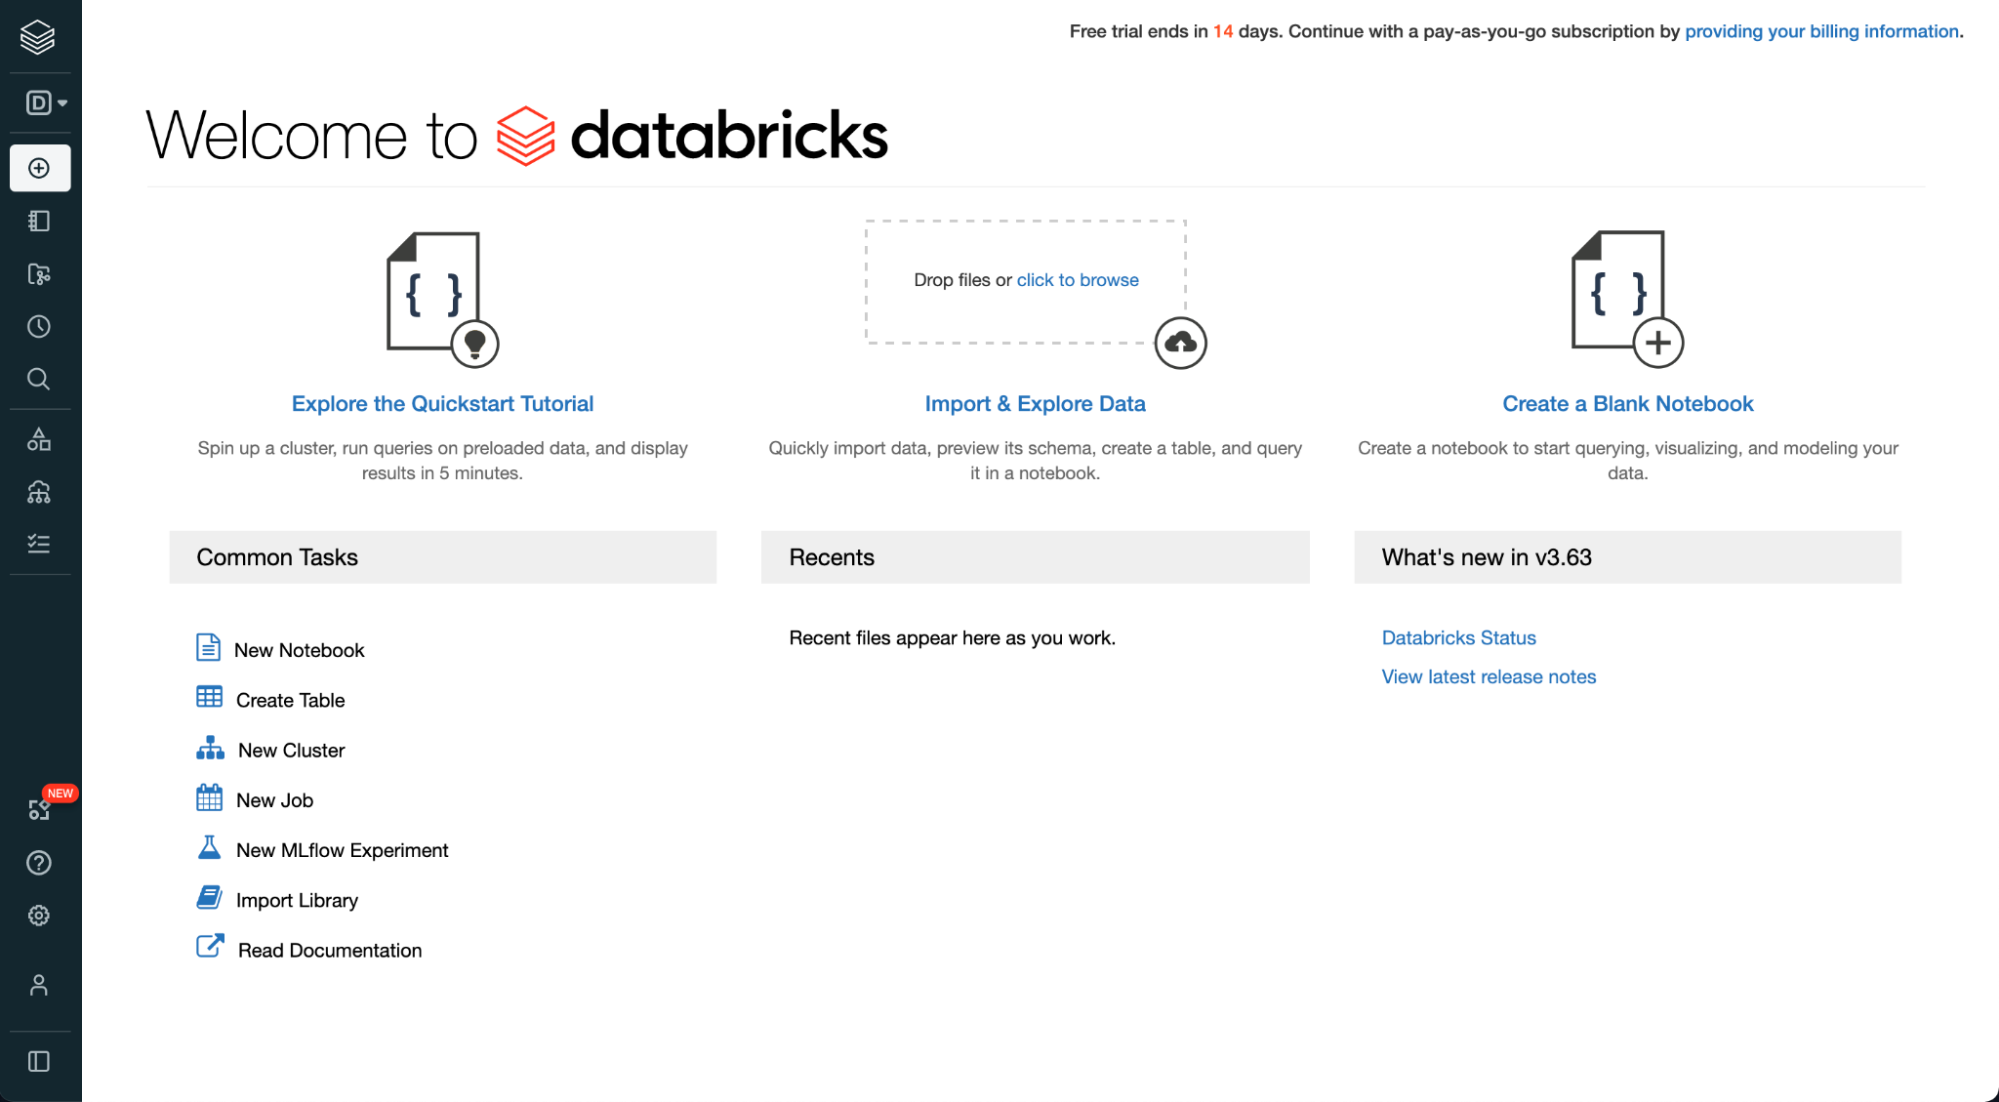 Welcome to the Databricks Workspace